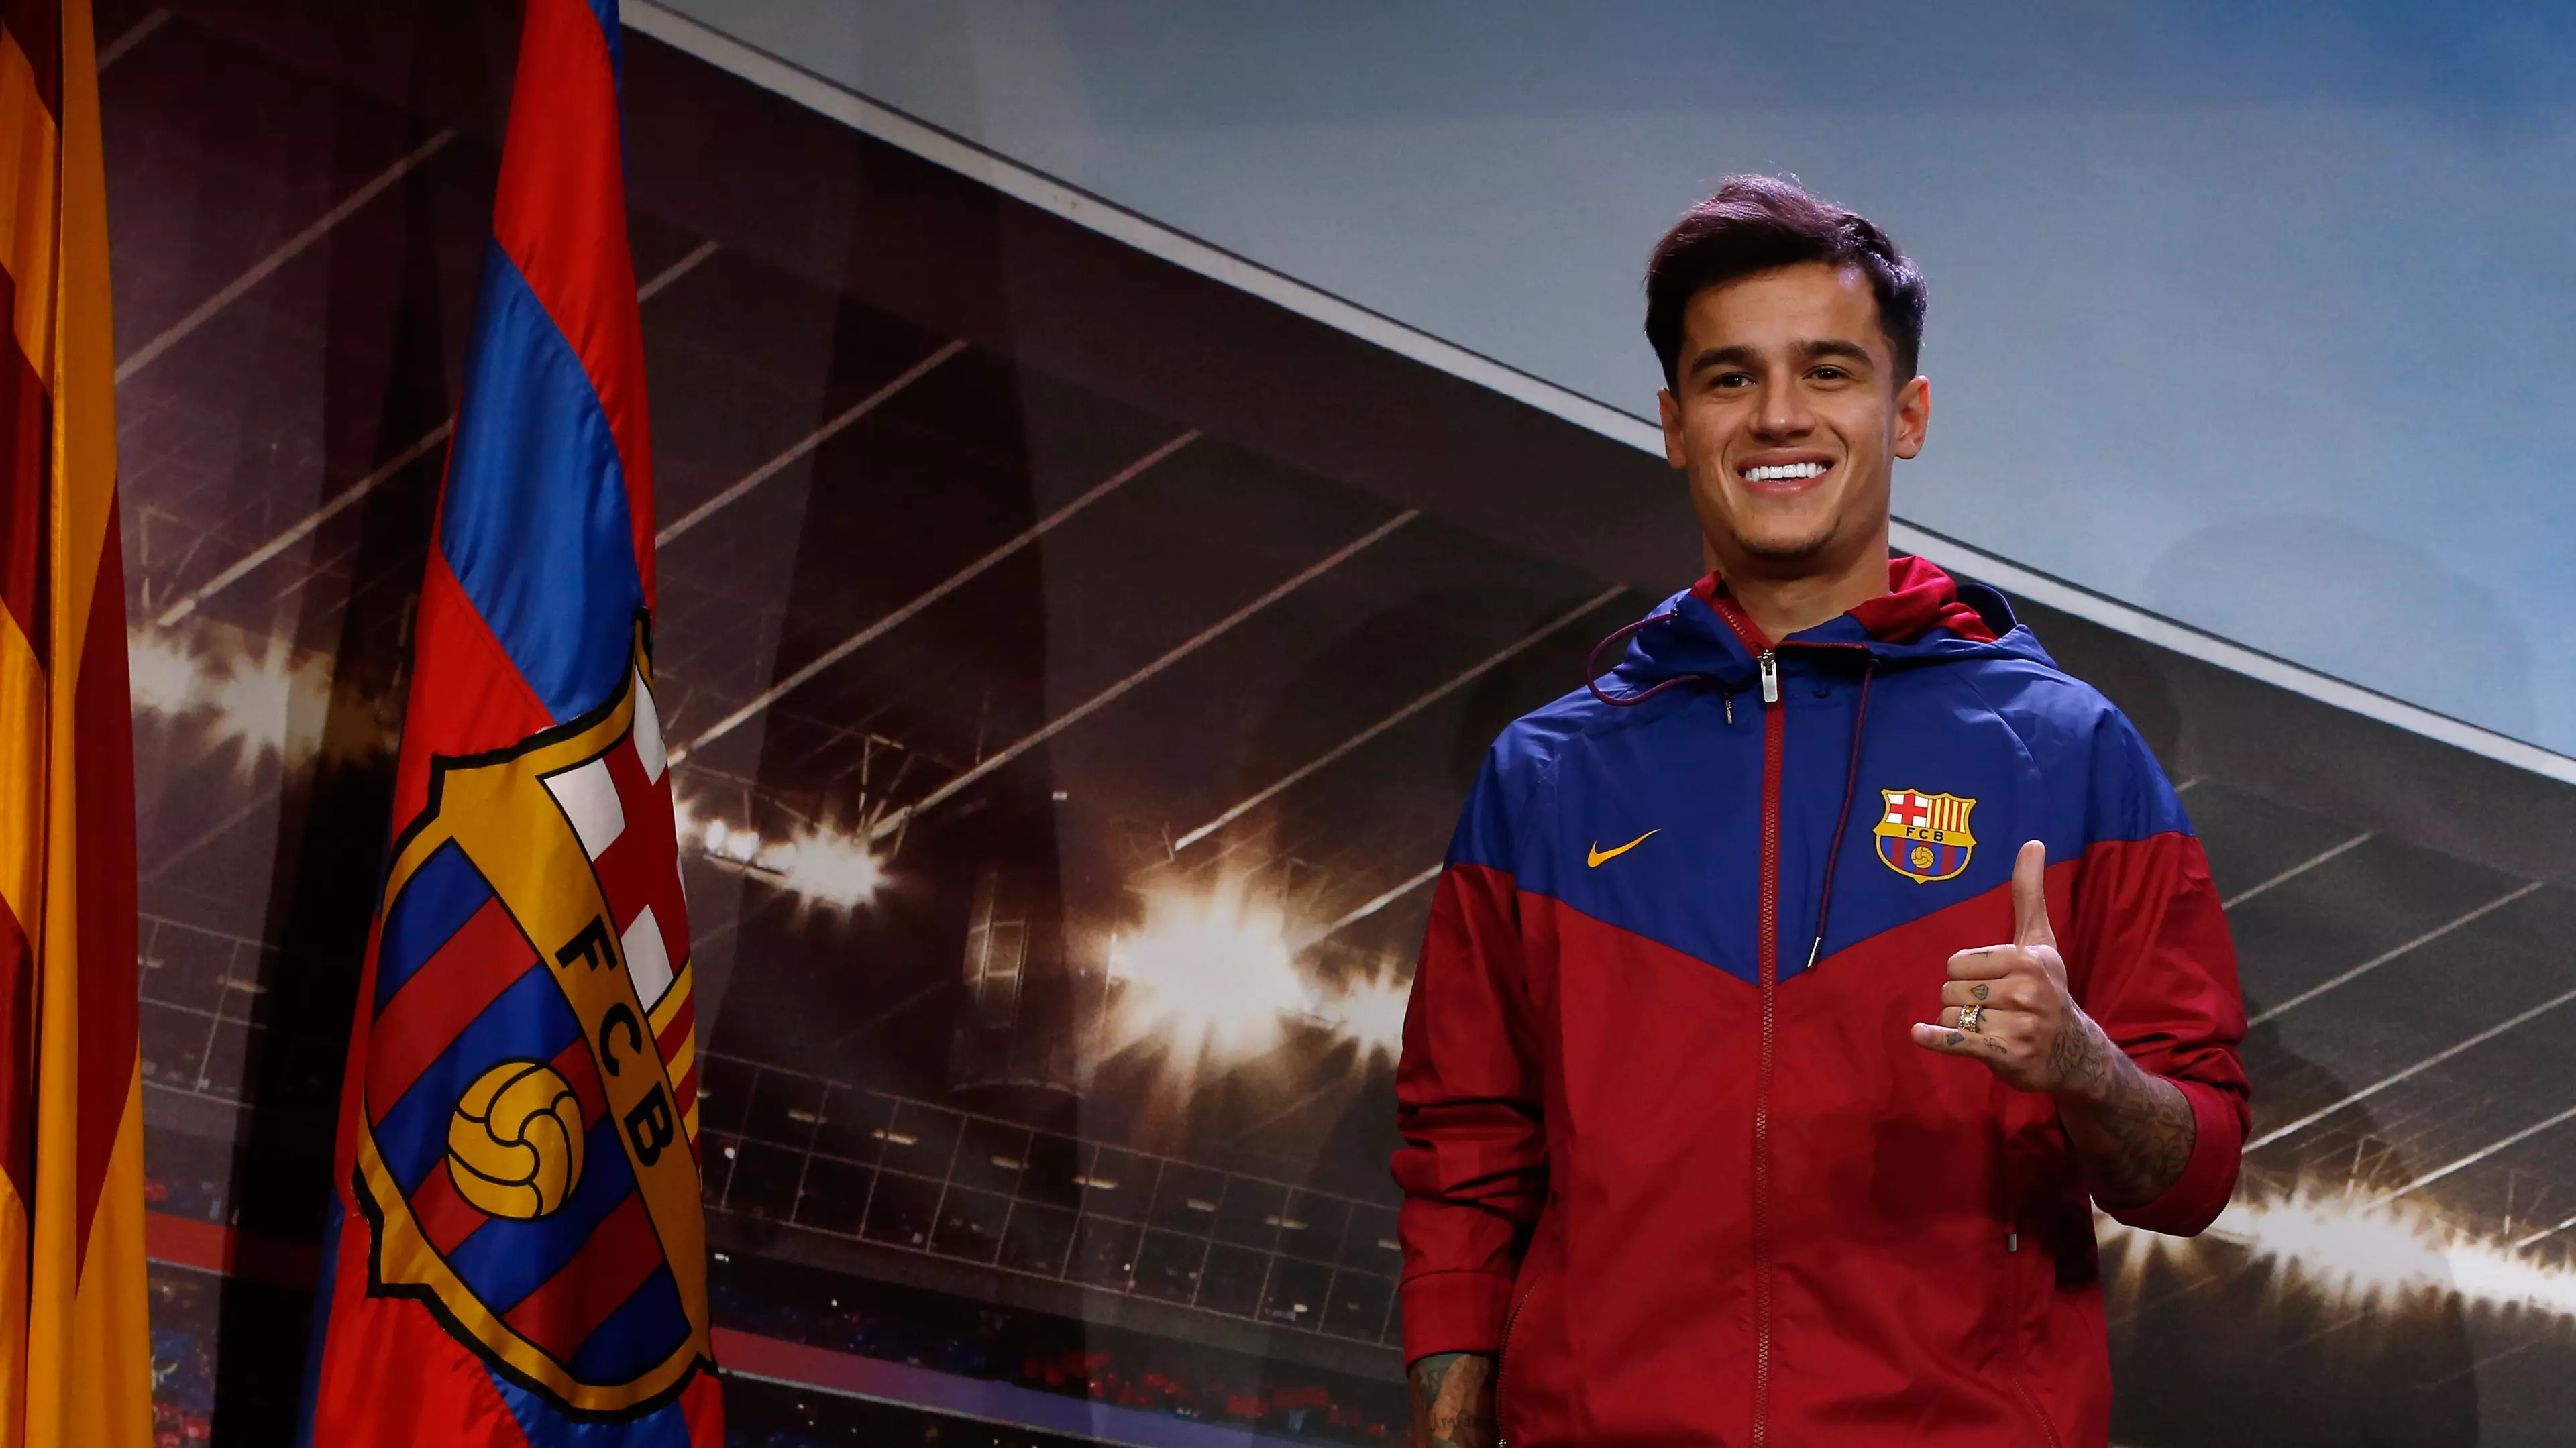 Philippe Coutinho's Response When Asked If He Wanted Lionel Messi's No.10 Shirt